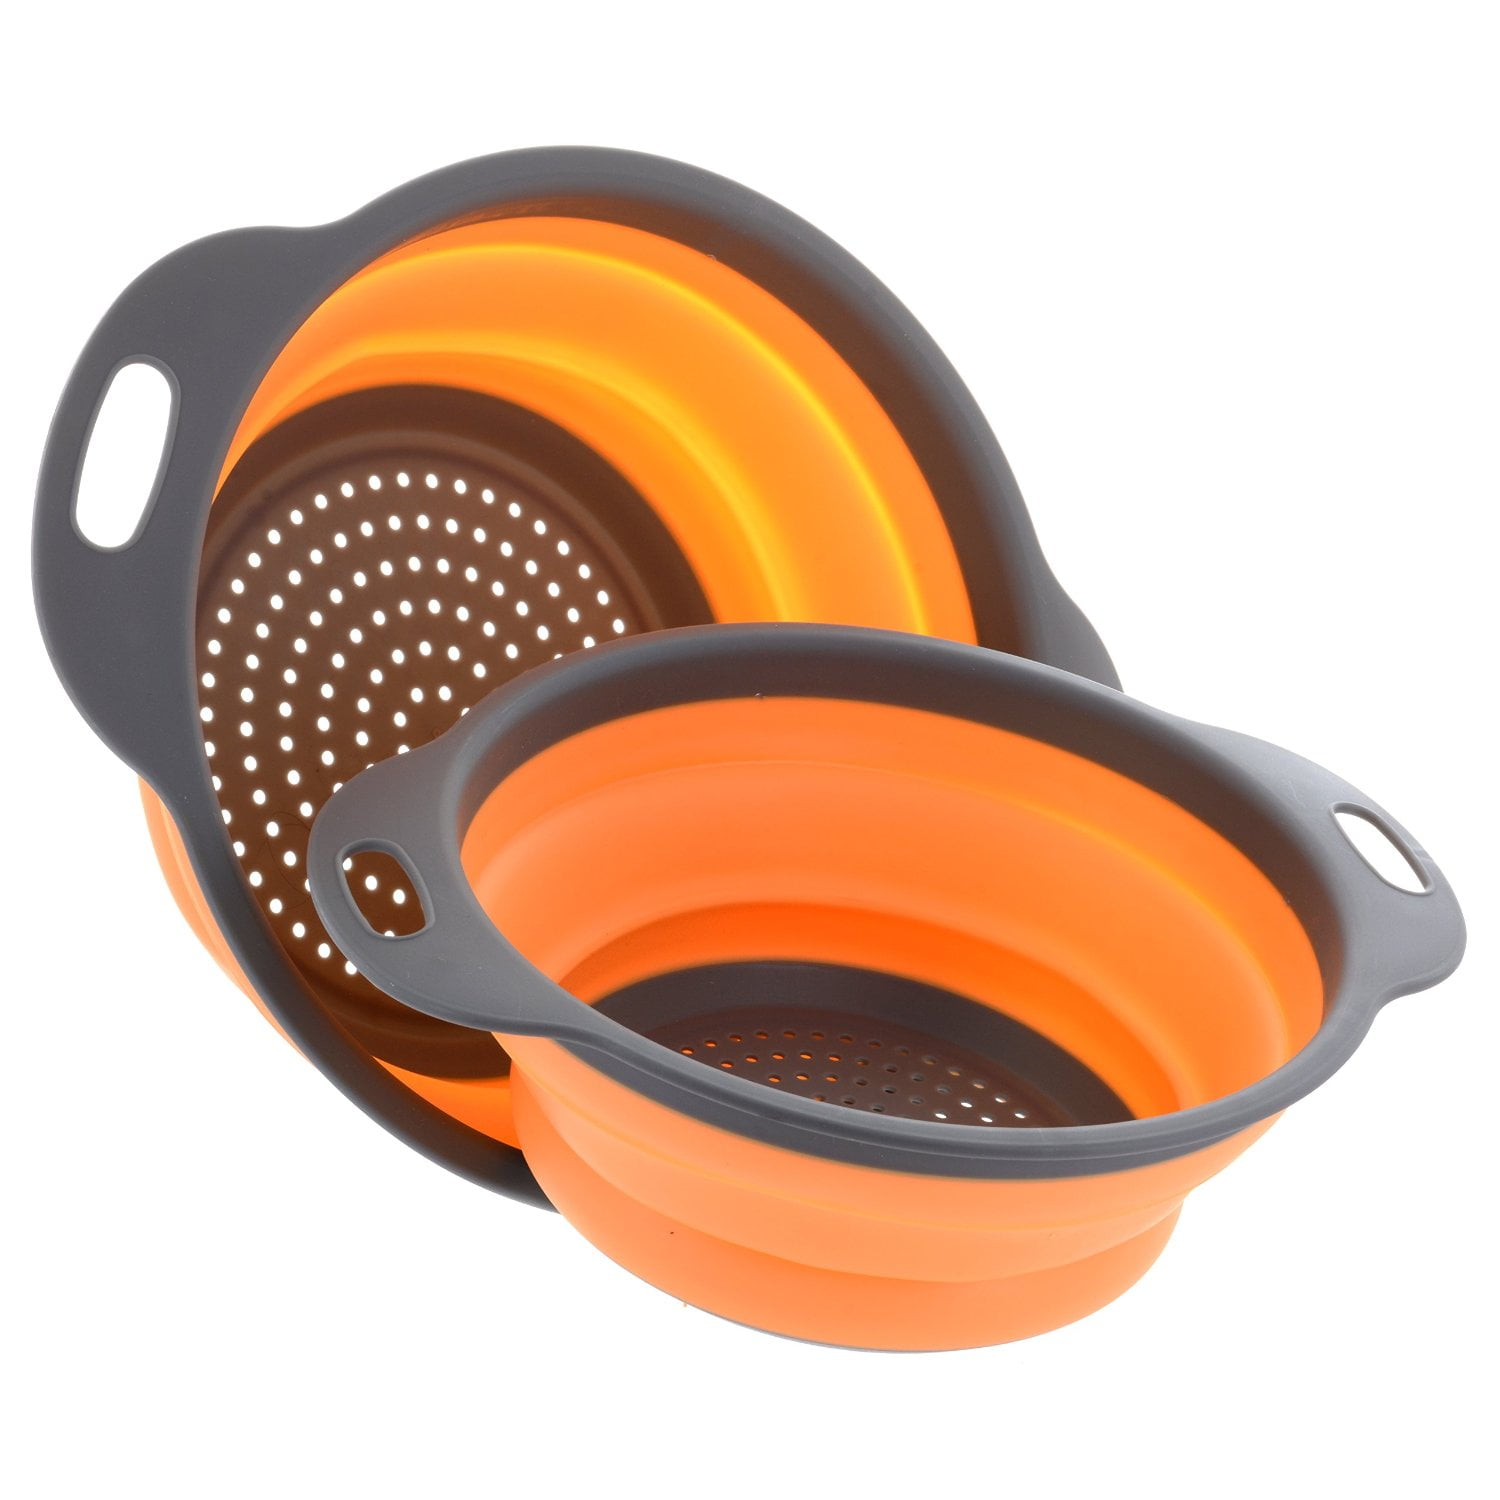 Best POP Food Strainers Collapsible Silicone Hand Held Strainer 8 Inch Diameter 